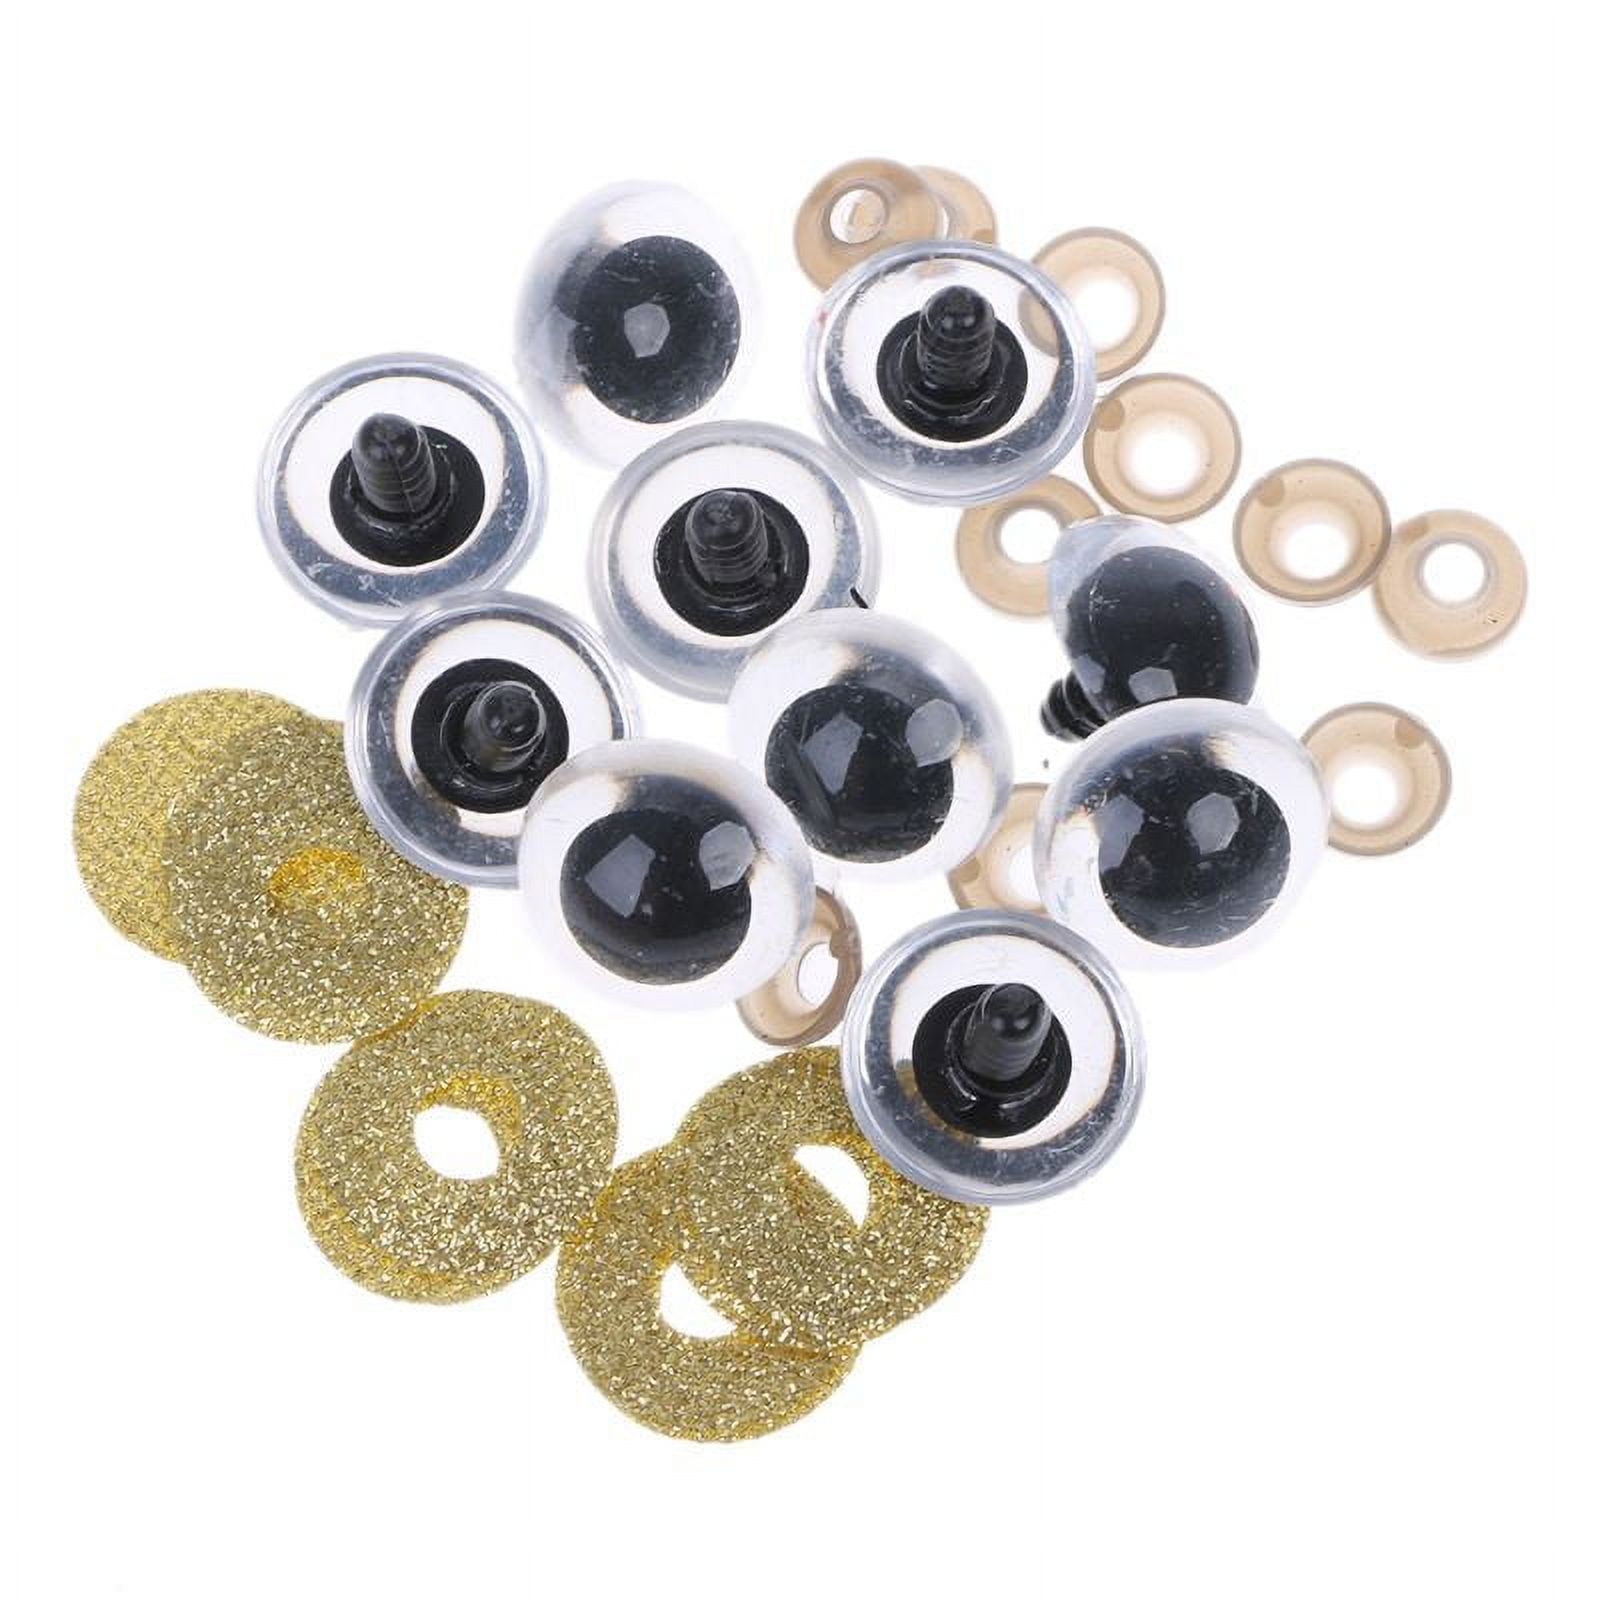 100 Pieces Large Safety Eyes for Amigurumi Stuffed Glitter Animal